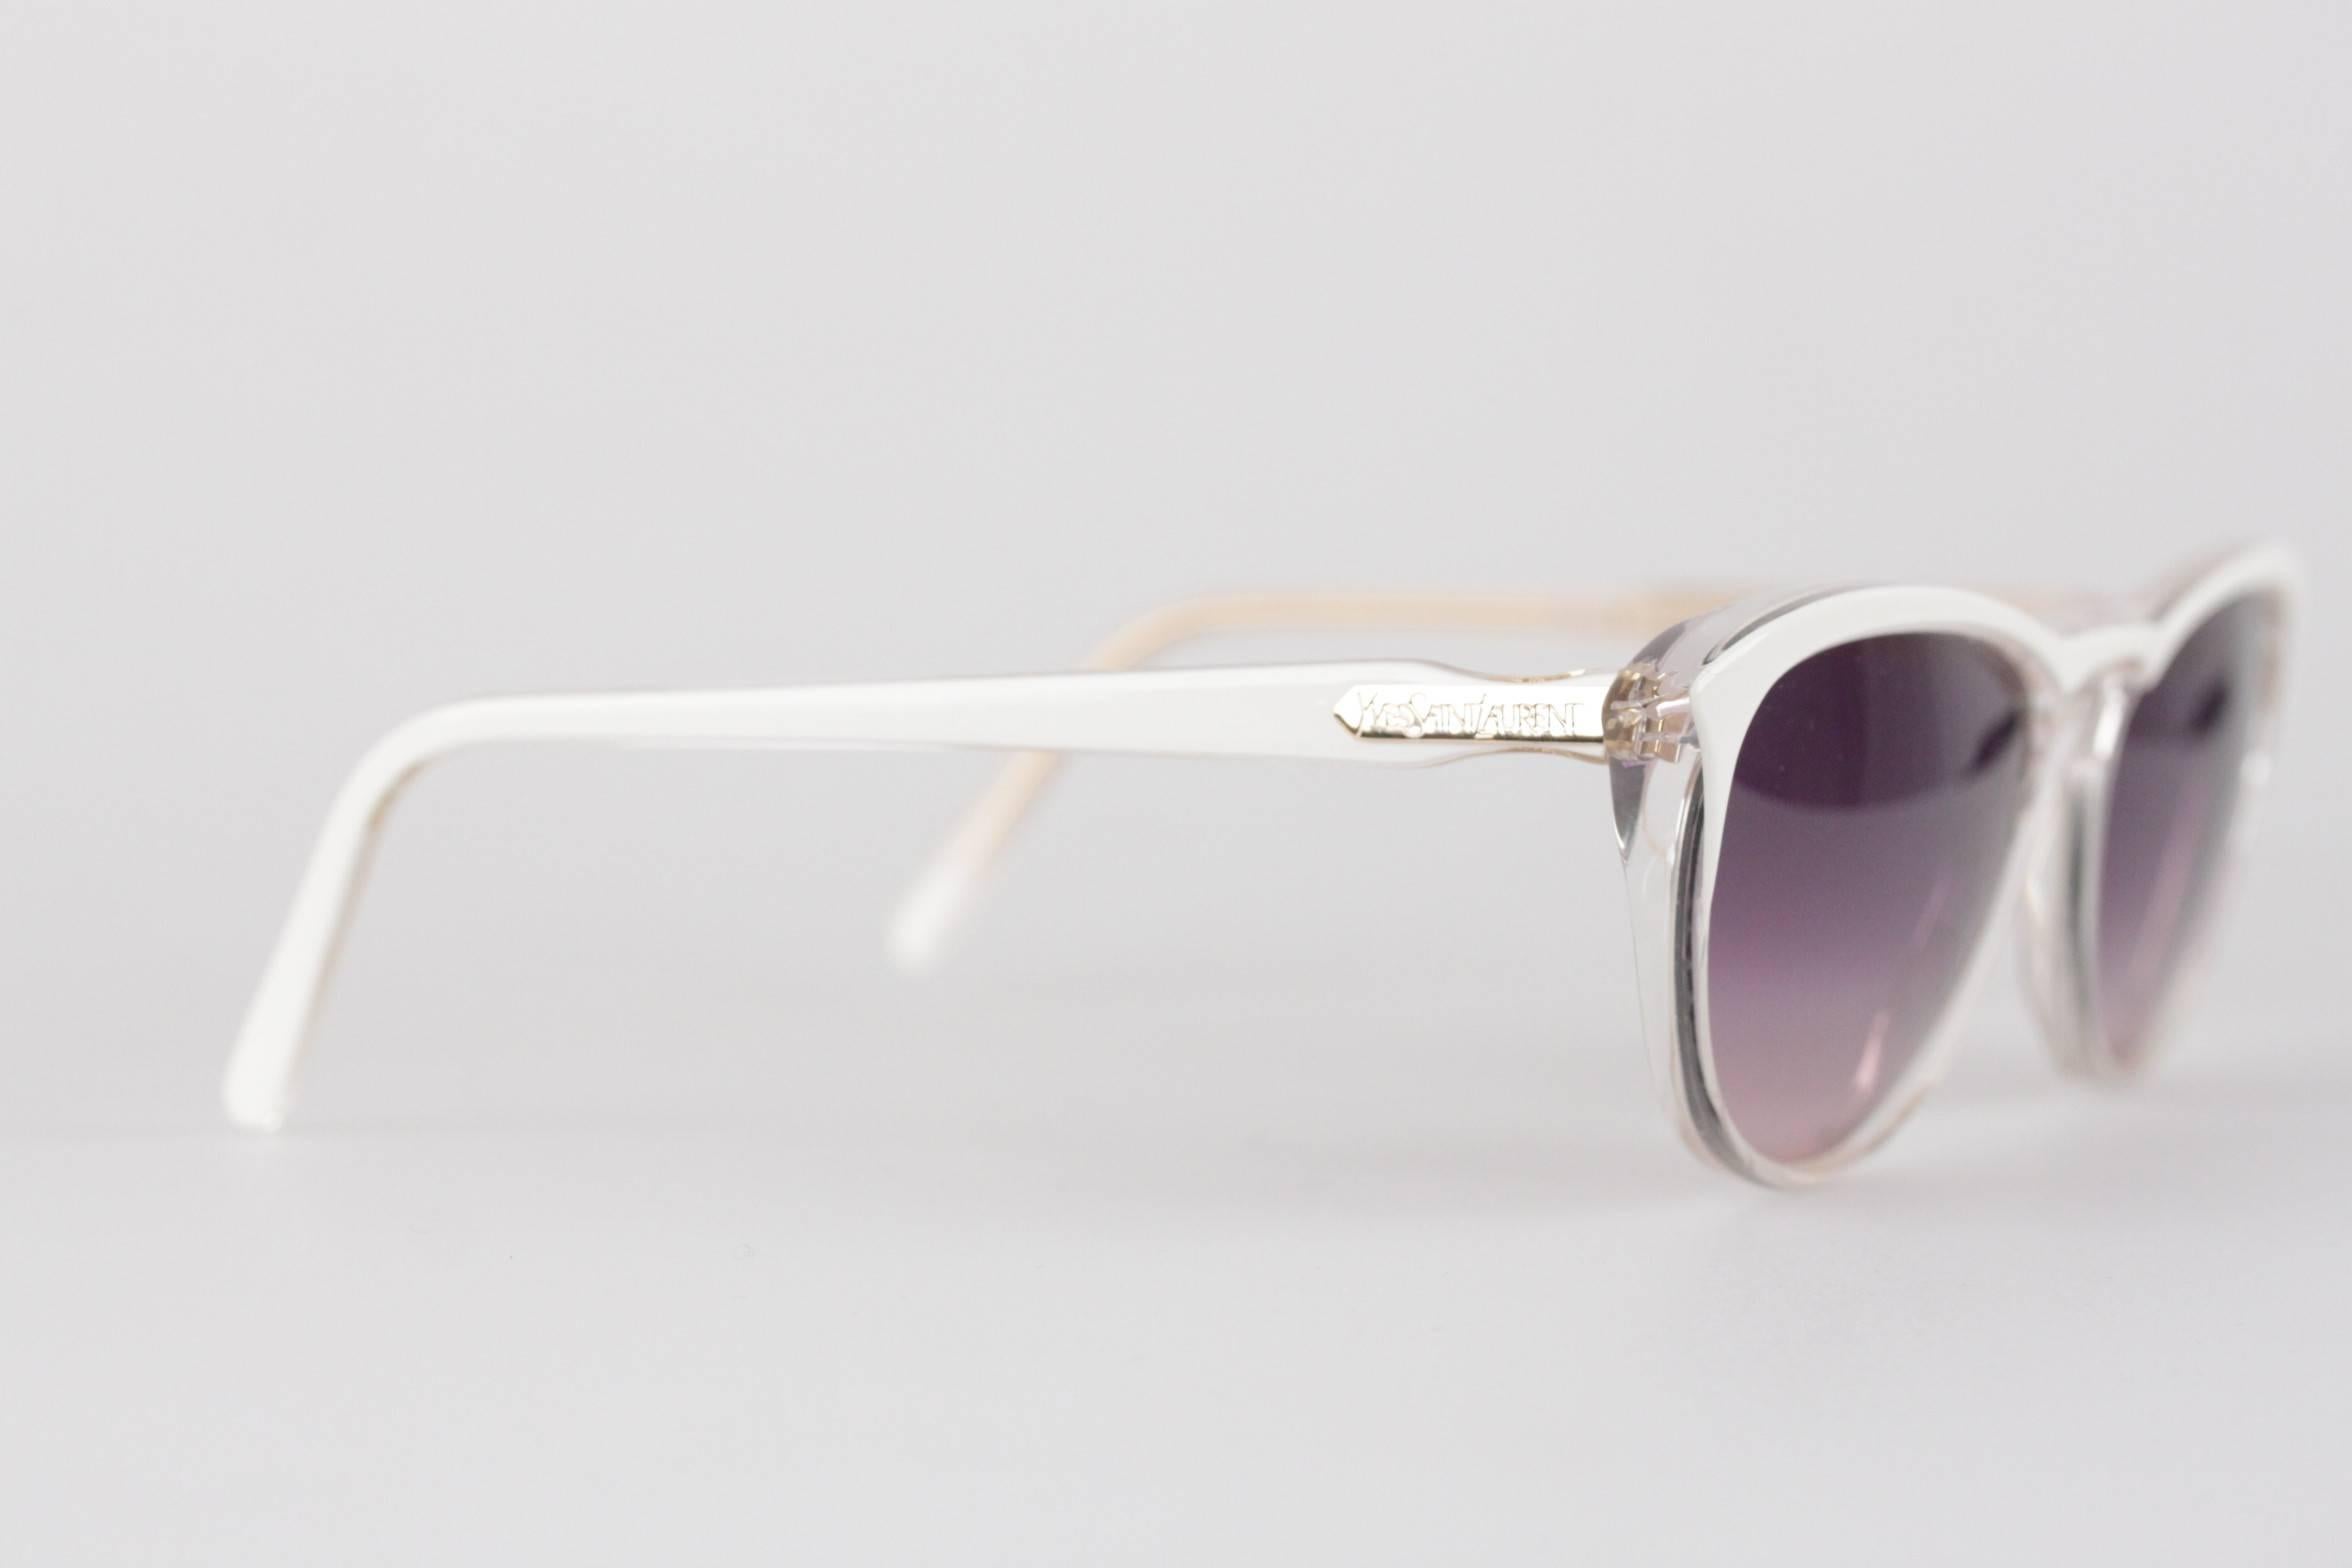 YVES SAINT LAURENT vintage MINT/PRISTINE Handmade Sunglasses

Mod. TIPHIS- 58/15 - 444 - Made in France

White cat-eye & transparent frame, with Purple GRADIENT 100% UV protection lens

Condition: A+ :MINT CONDITION! Mint item. Never worn or